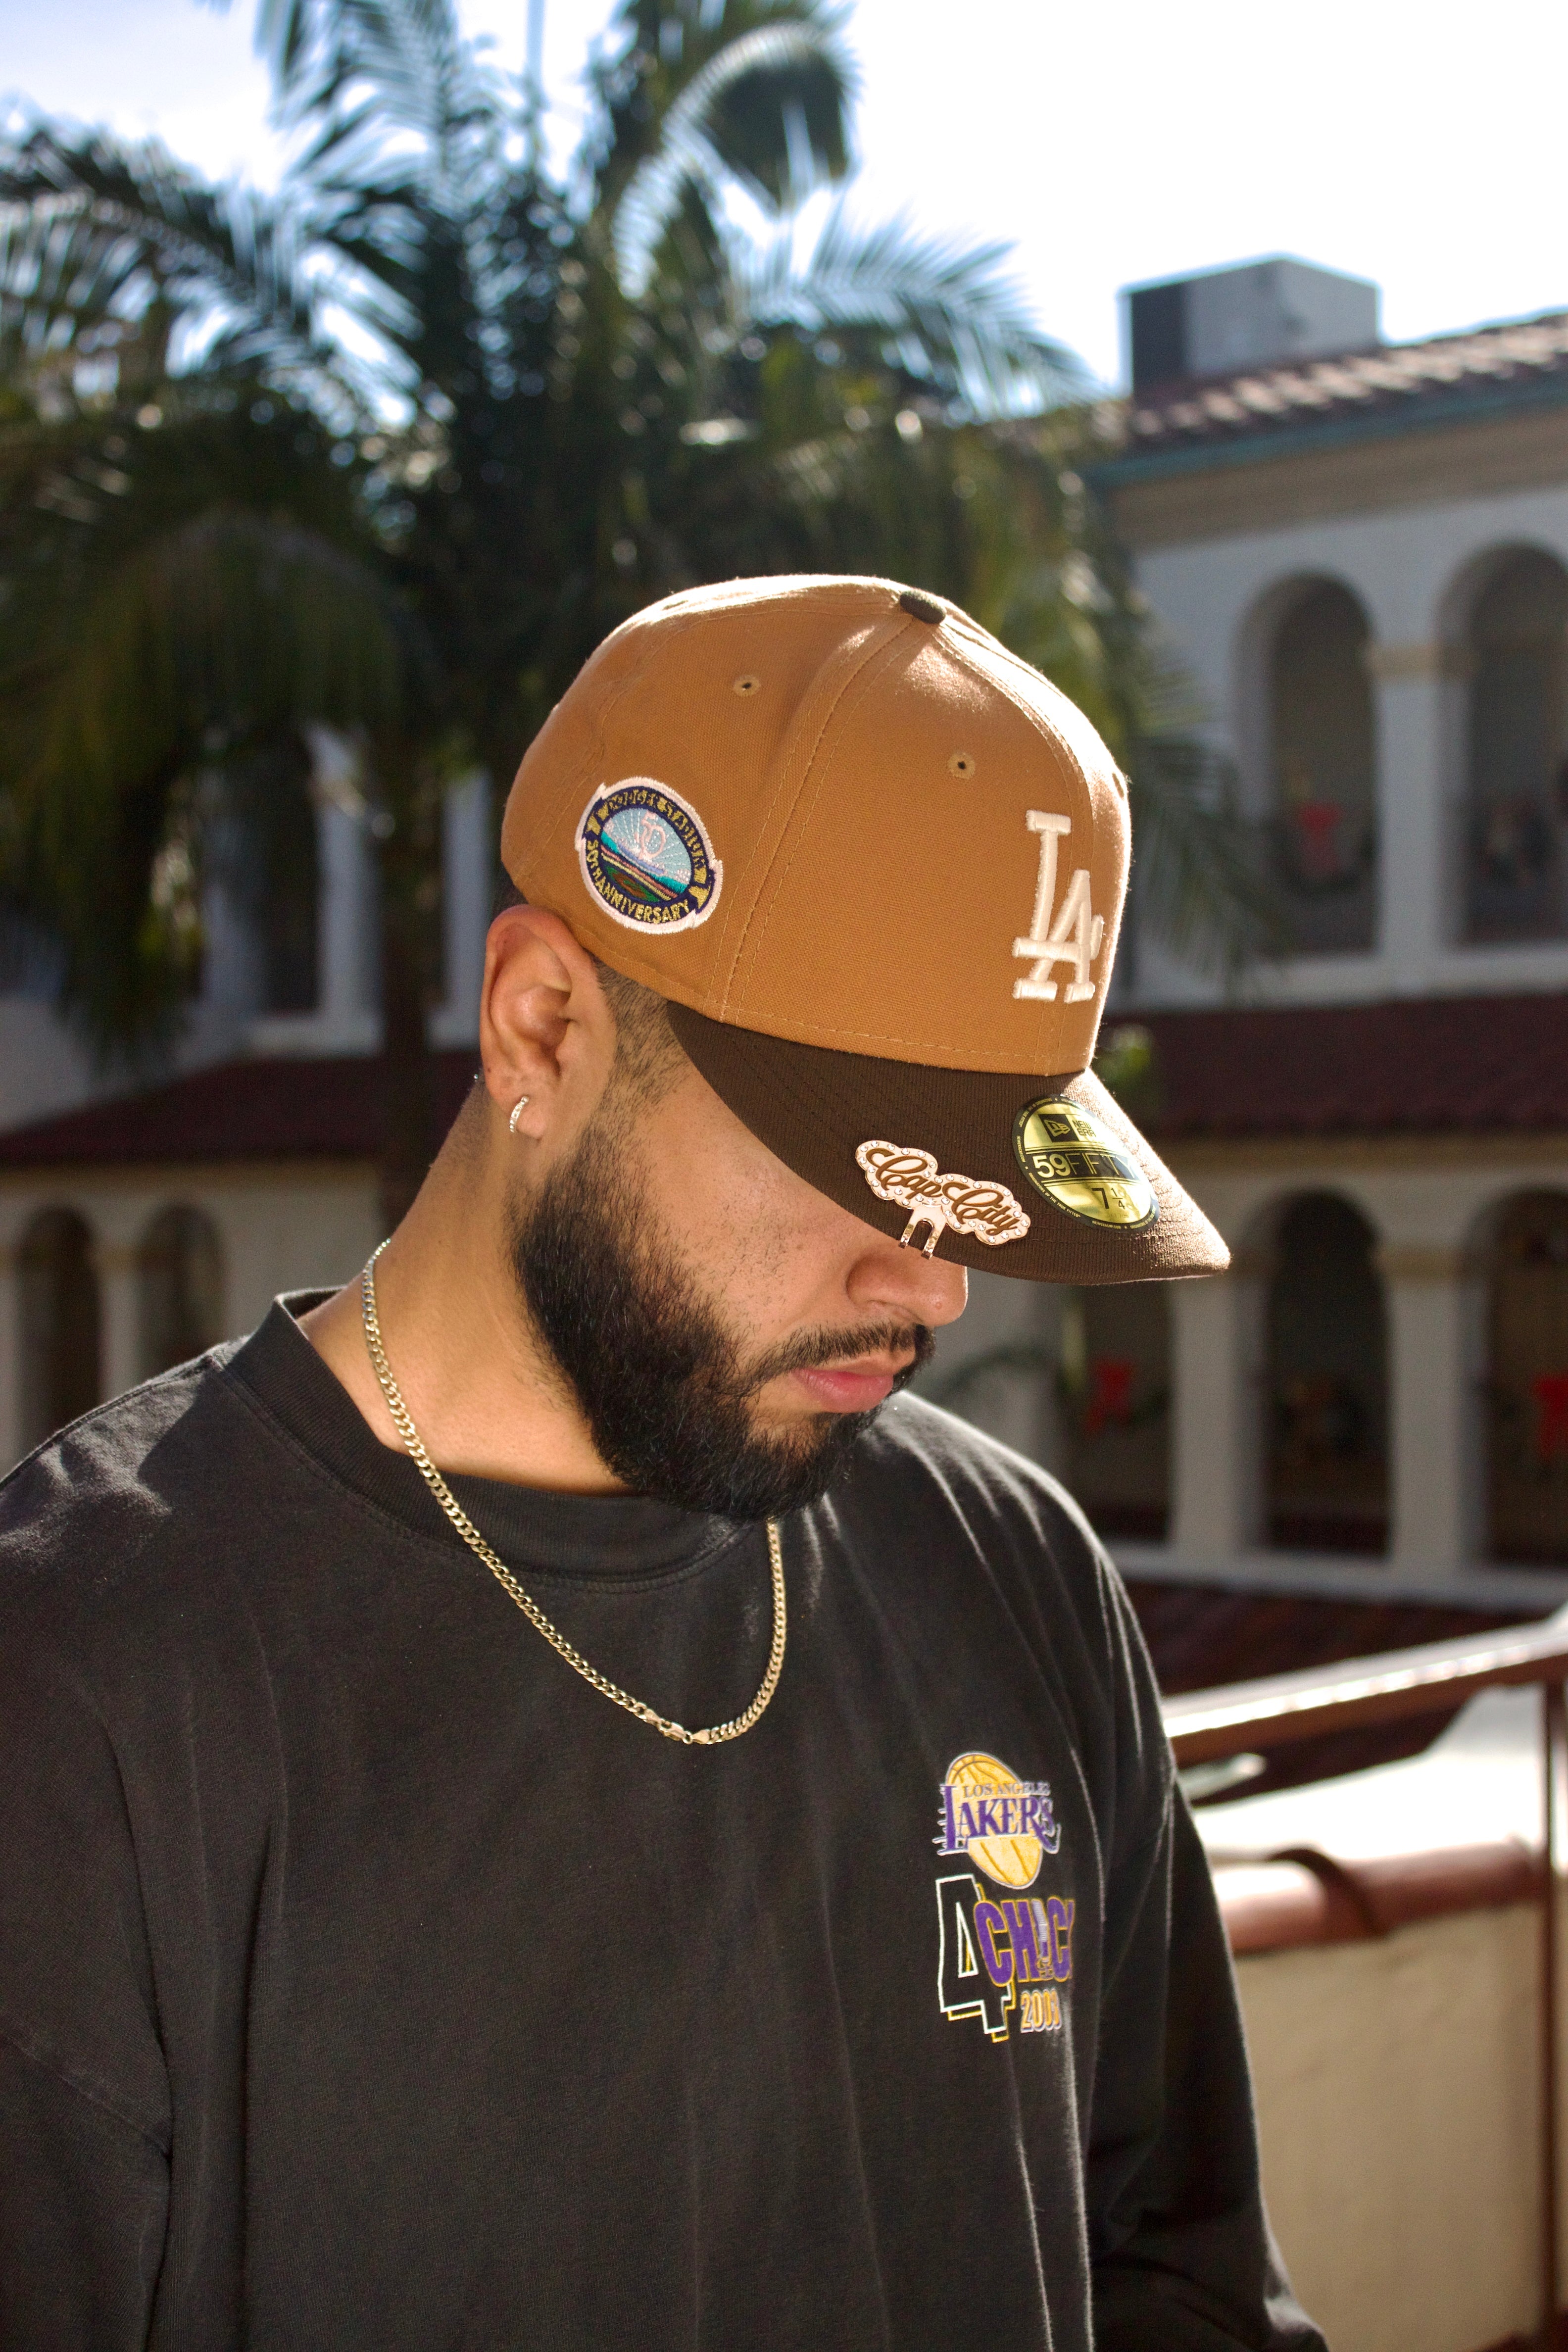 NEW ERA EXCLUSIVE 59FIFTY TAN/WALNUT LOS ANGELES DOGERS W/ 50TH ANNIVERSARY PATCH